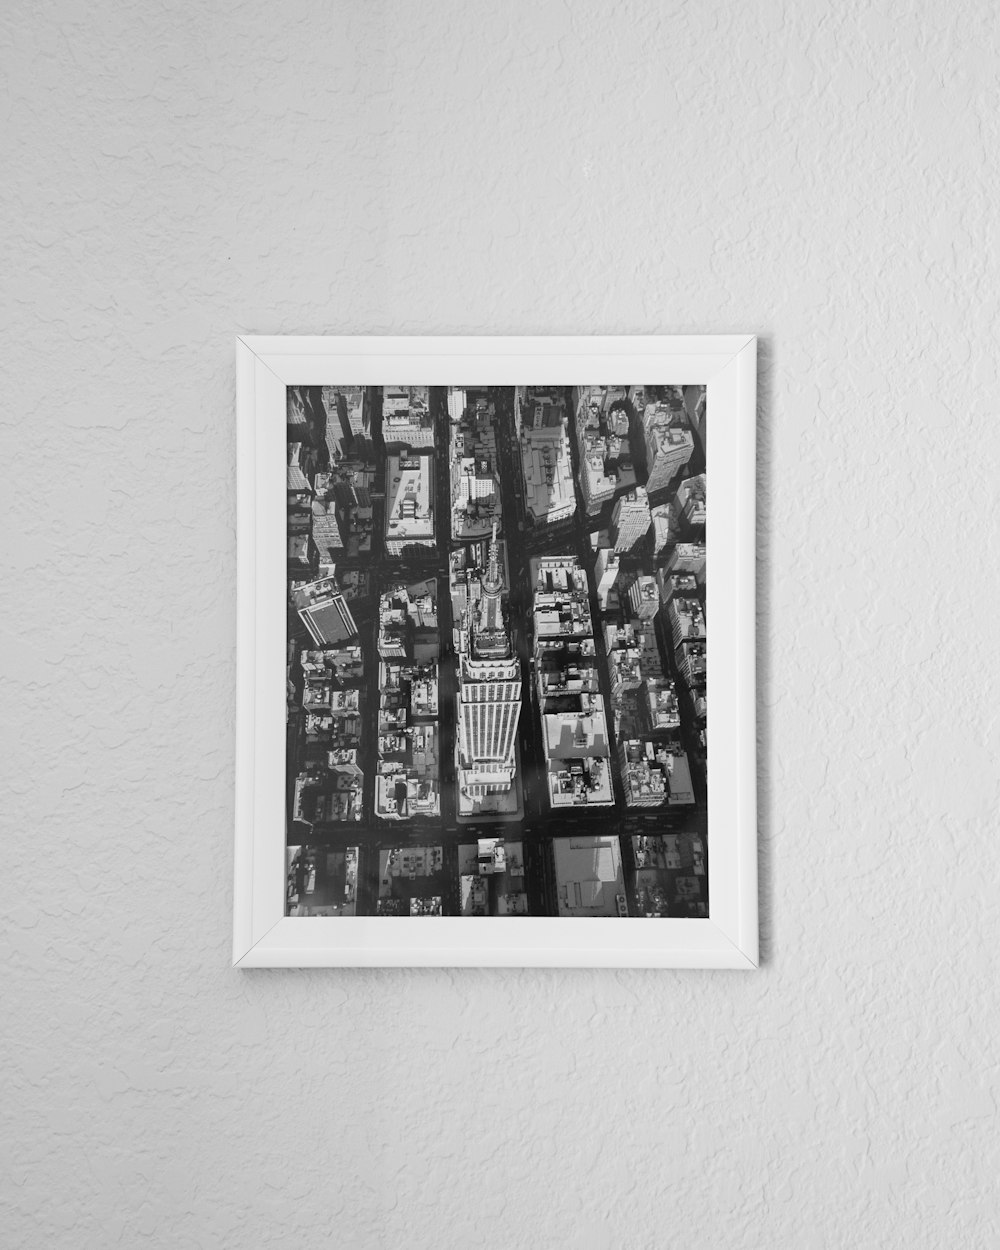 grayscale photo of people in picture frame